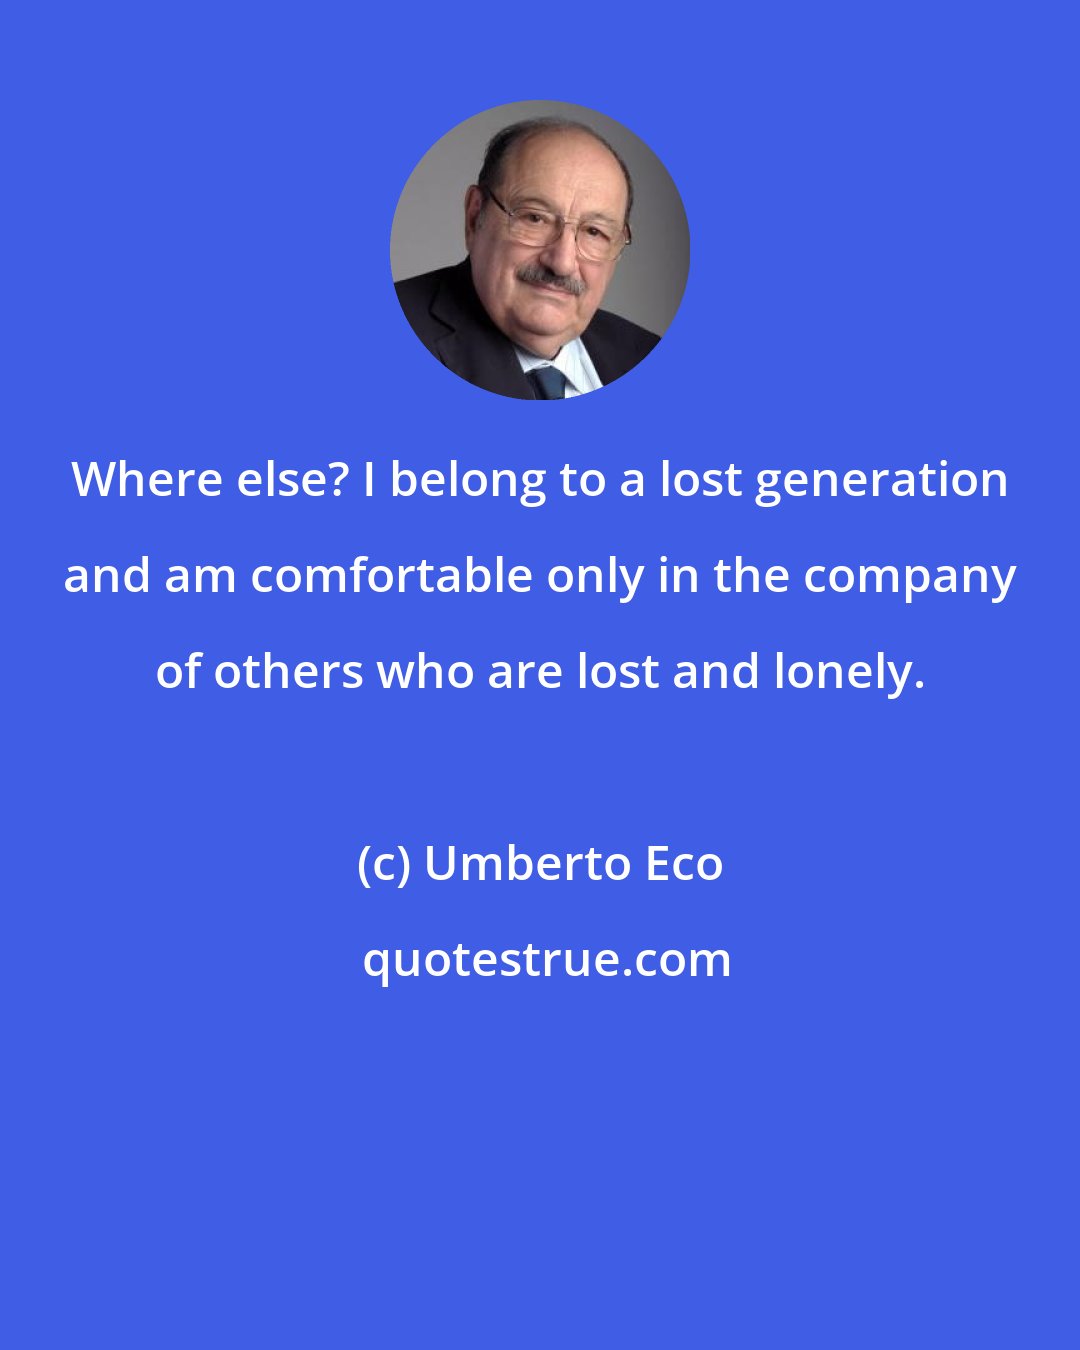 Umberto Eco: Where else? I belong to a lost generation and am comfortable only in the company of others who are lost and lonely.